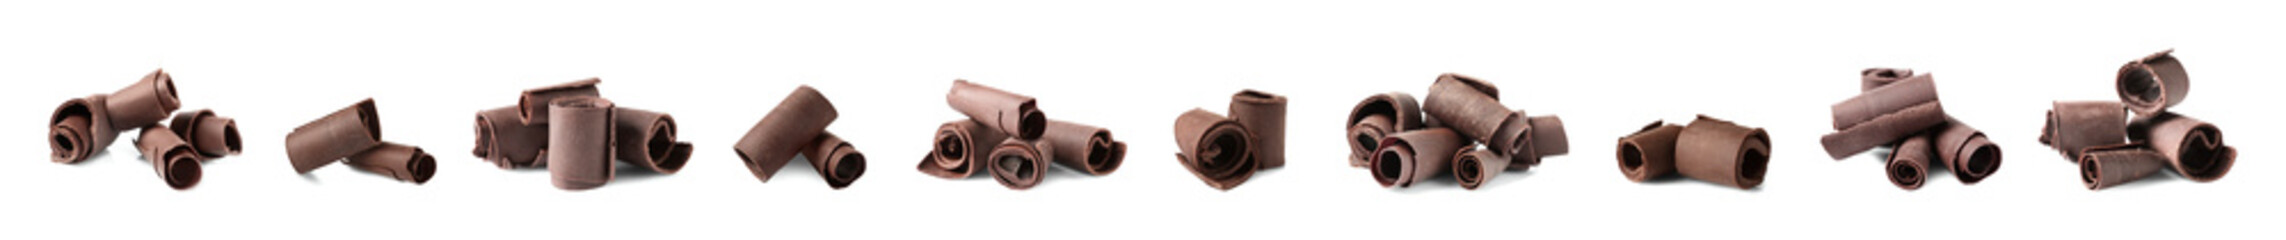 Set of delicious chocolate curls on white background